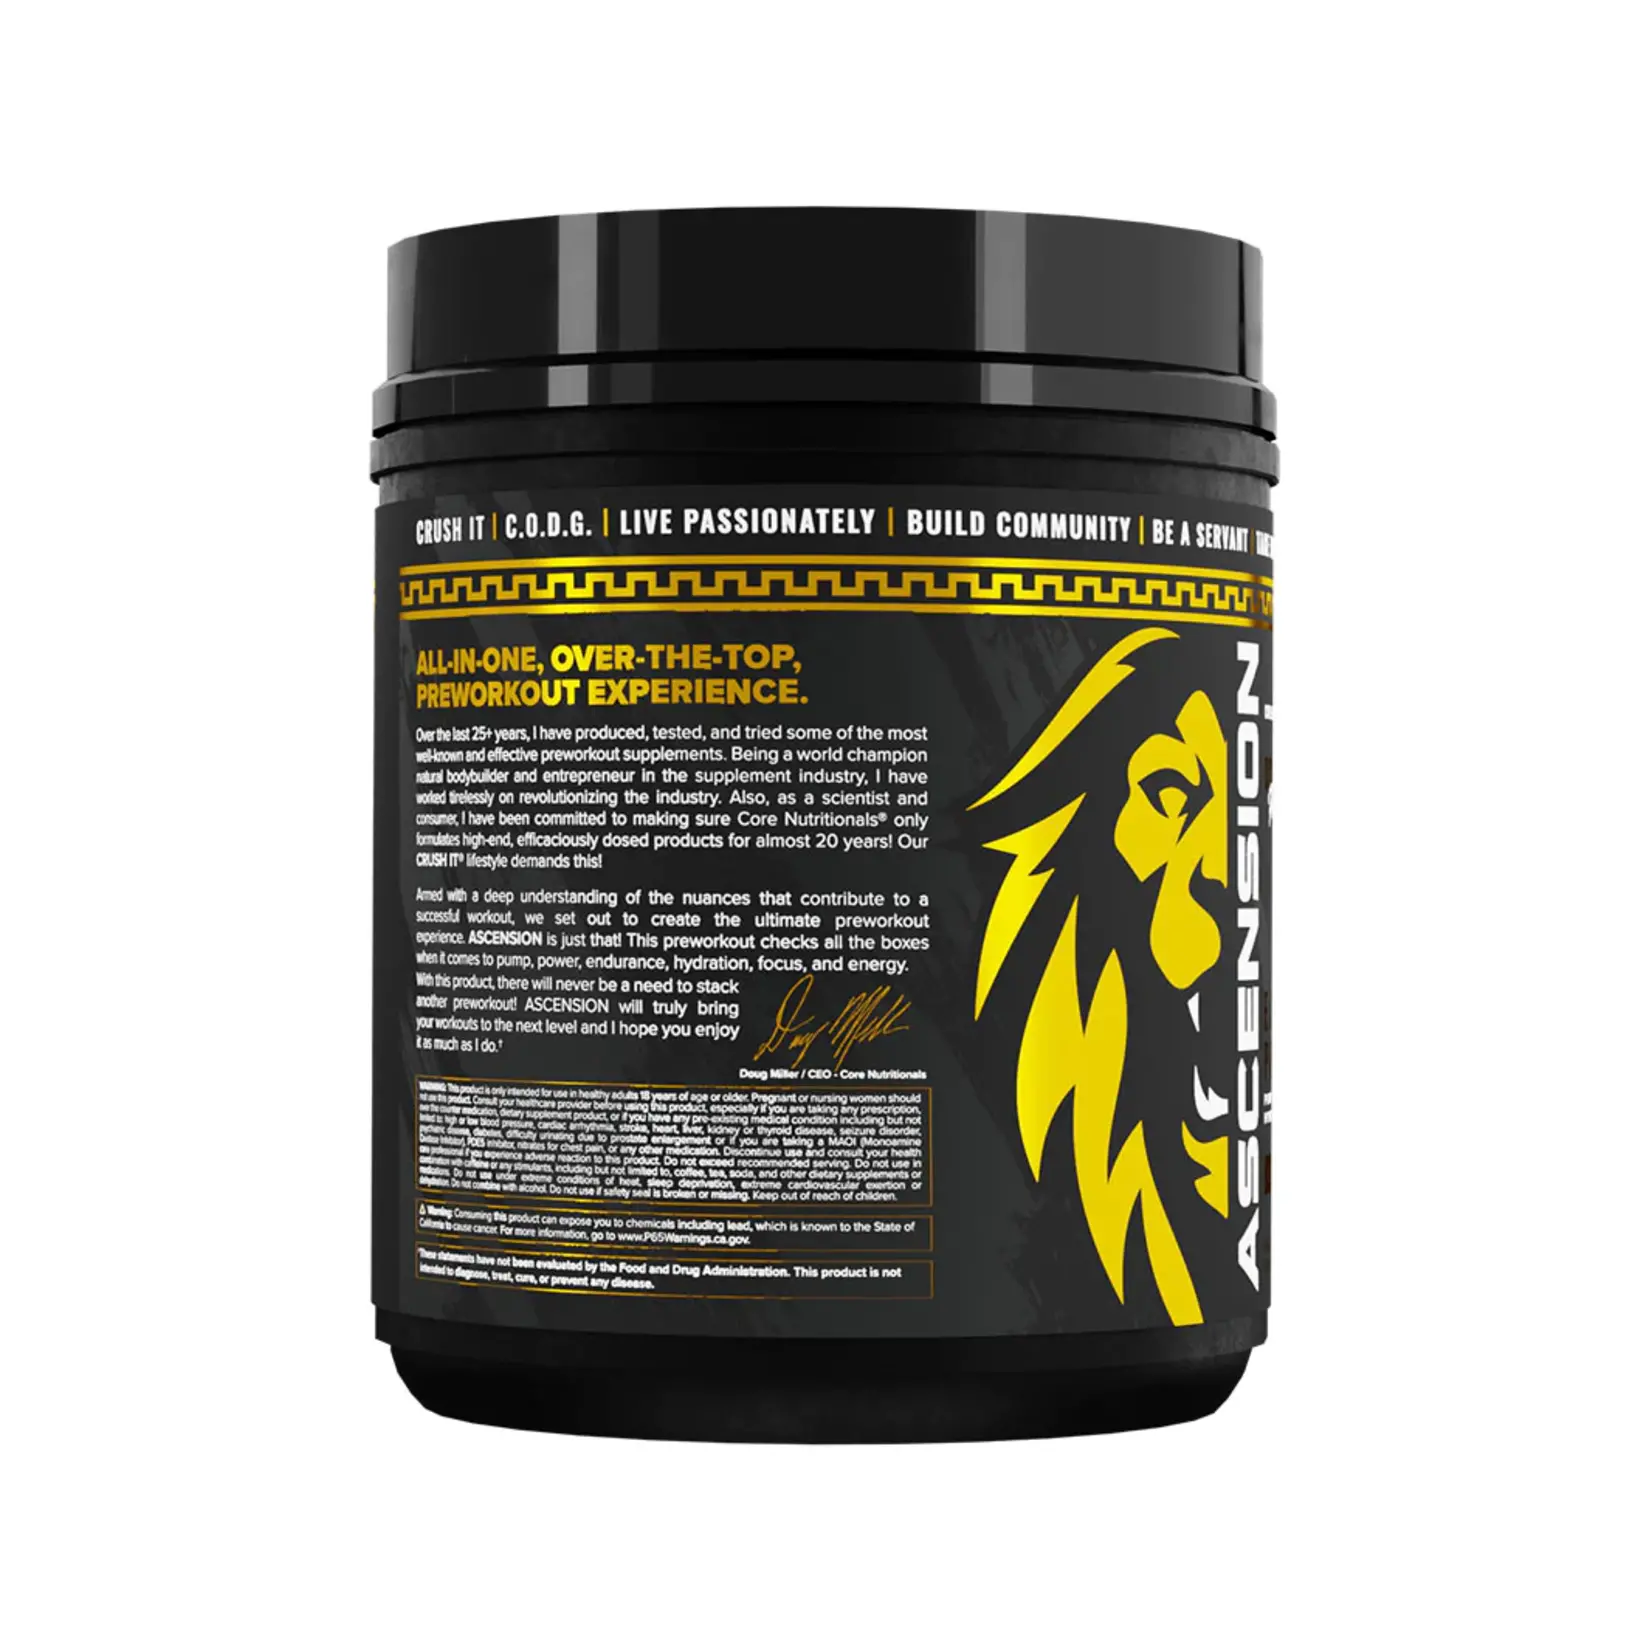 Core Nutritionals Ascension Lion on the Beach